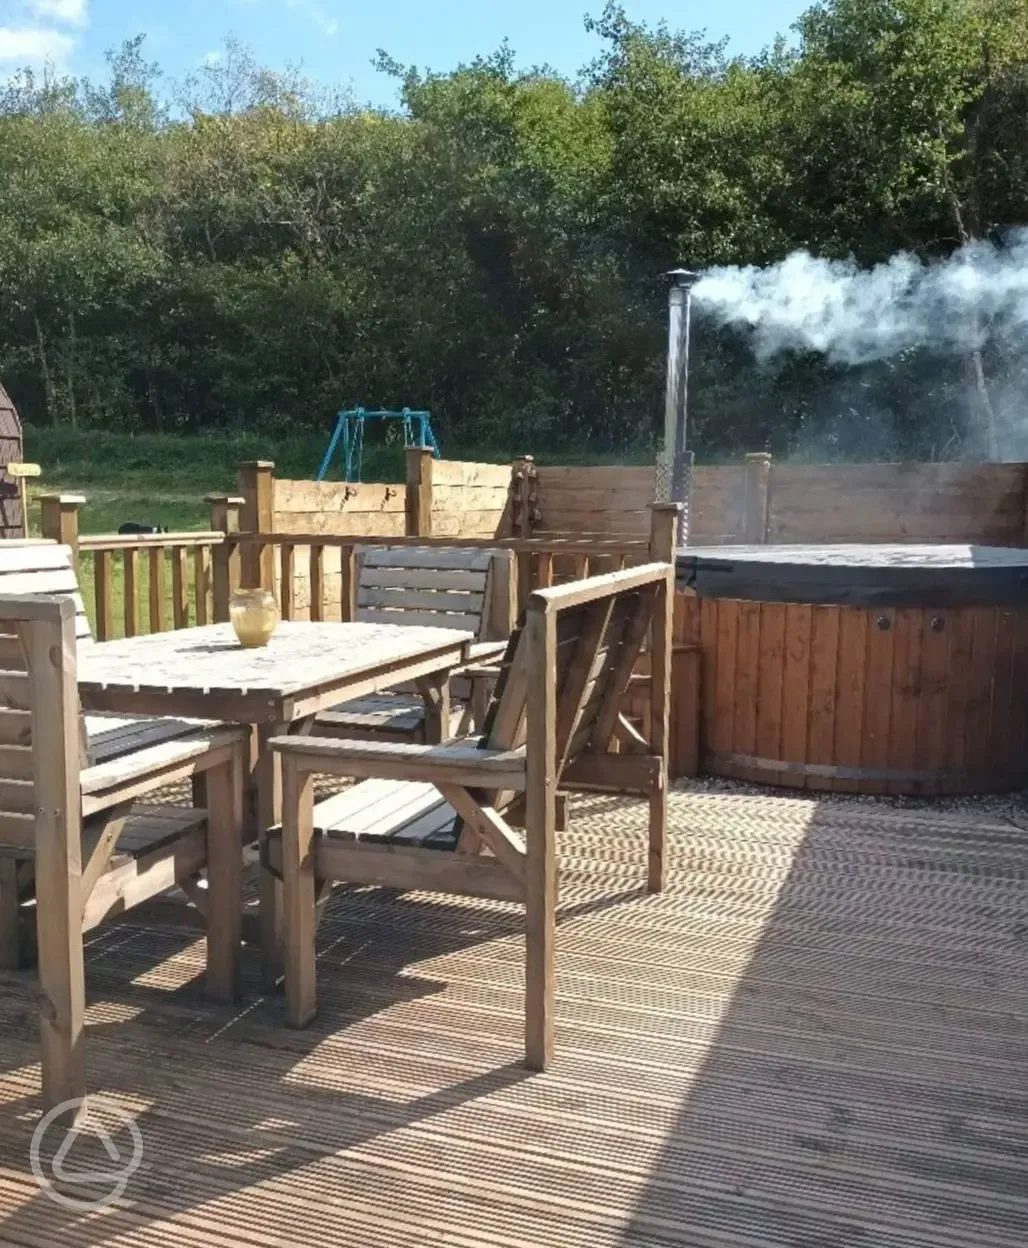 Hot tub and outdoor seating with swing set in background